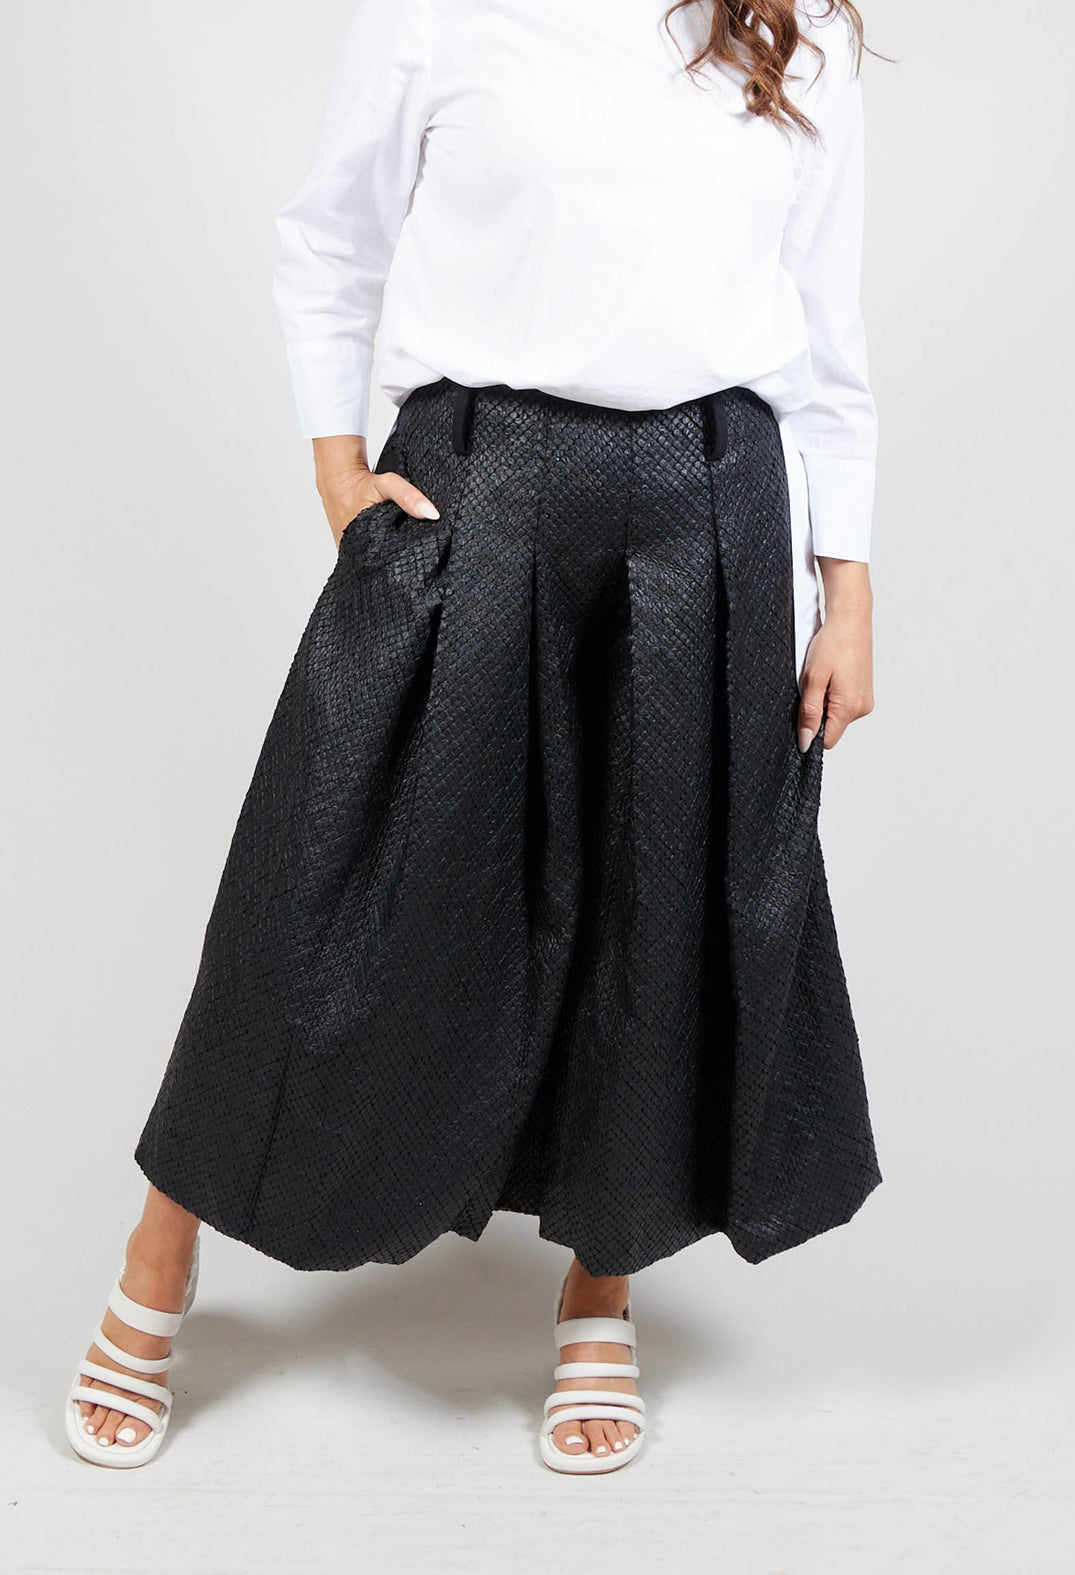 Textured Zip Up Culottes in Black